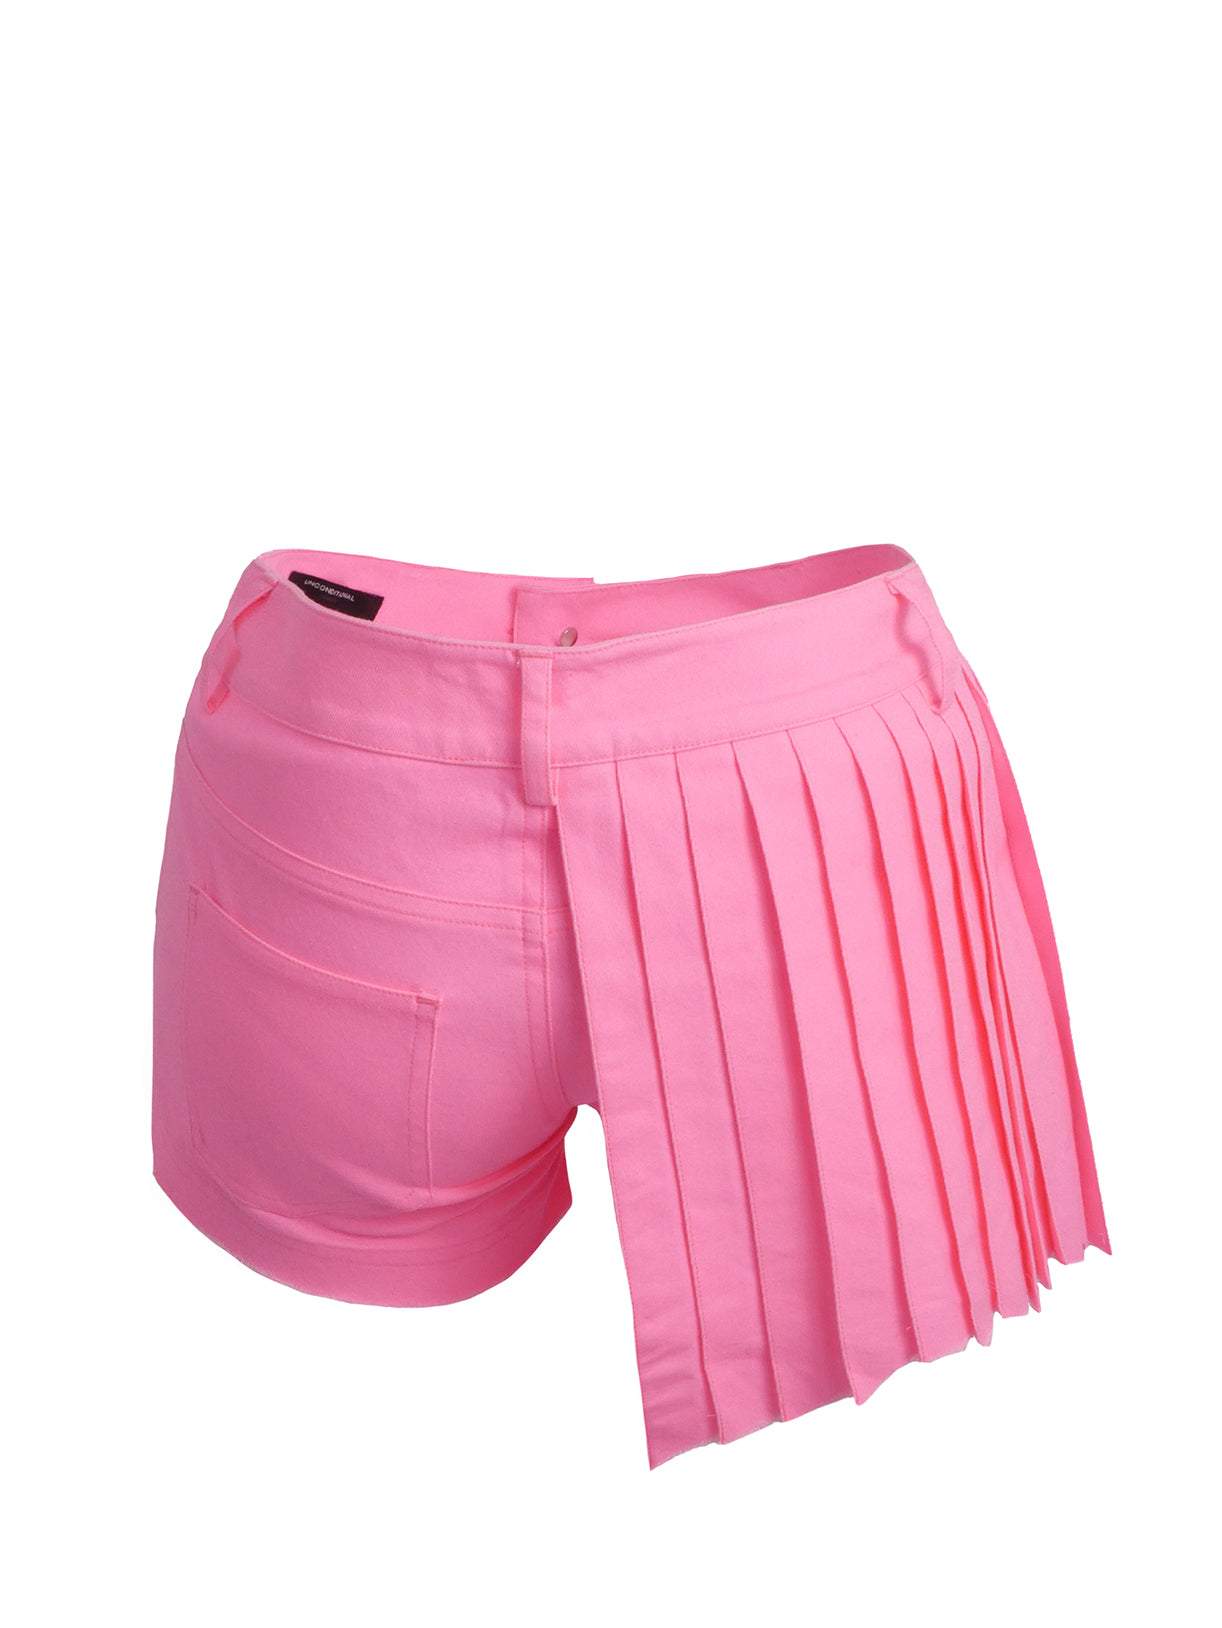 PINK JEANS SHORTS WITH PLEATED DETAIL